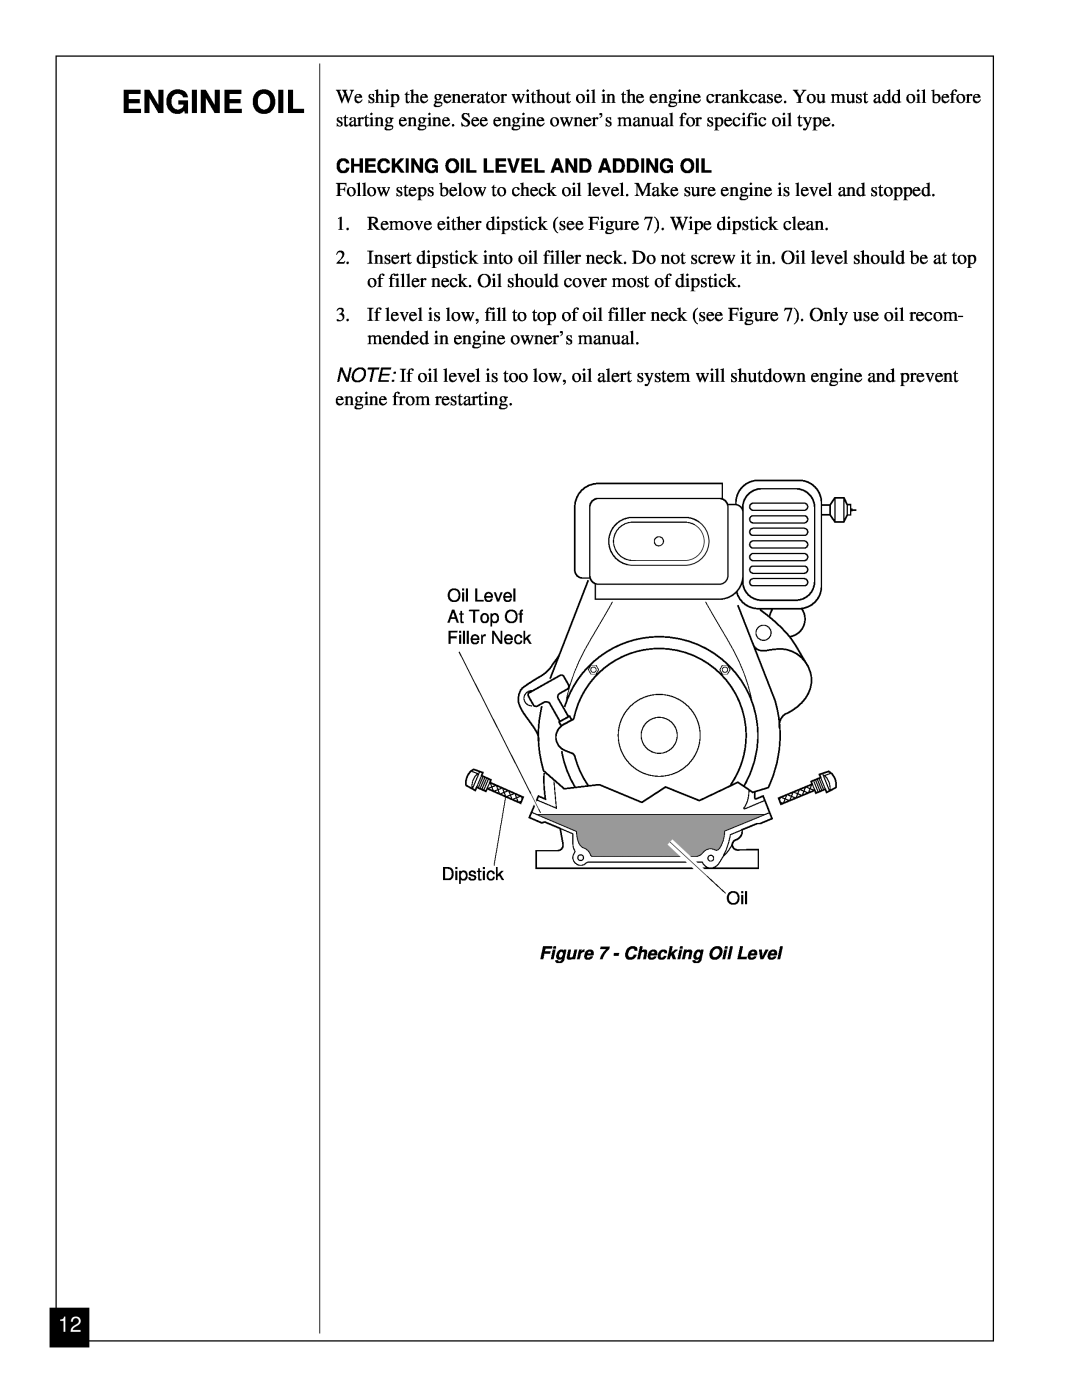 Master Lock MGY5000 installation manual Engine Oil, Checking Oil Level And Adding Oil 